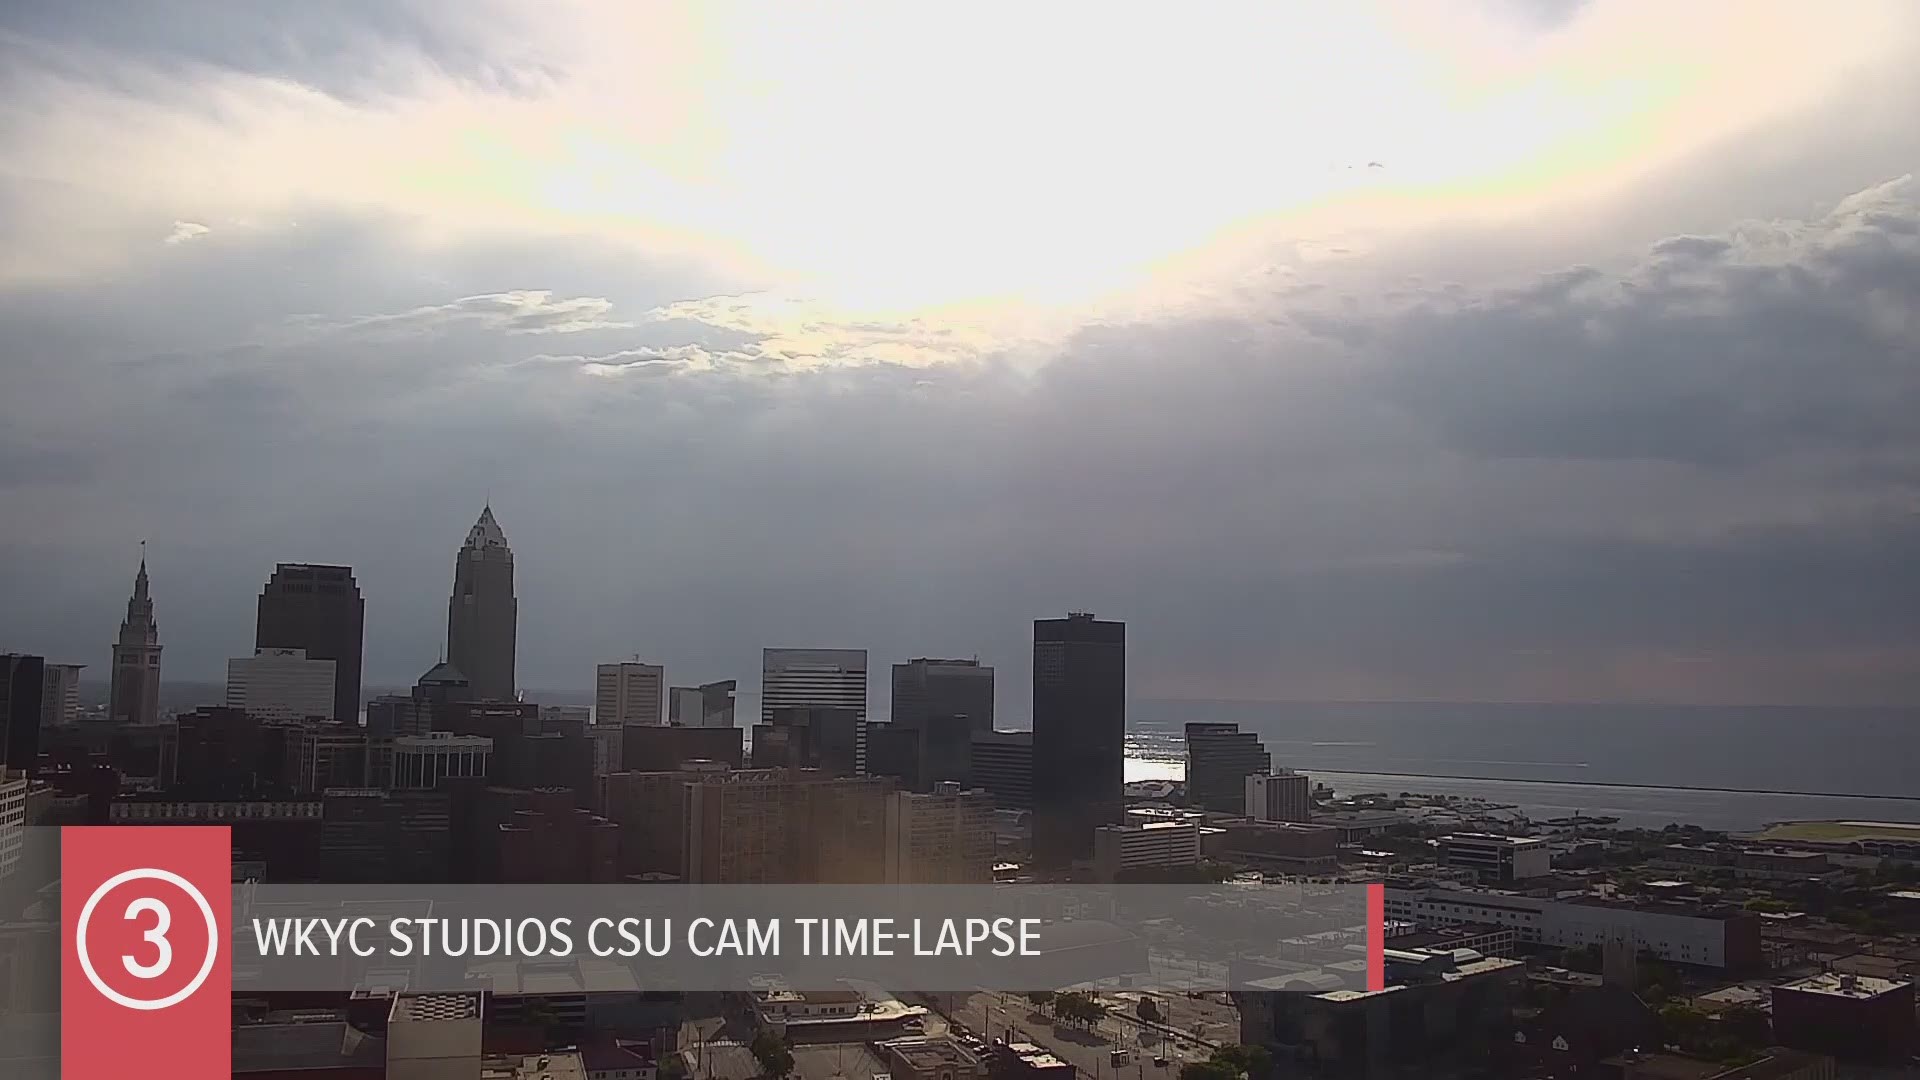 WOW... Check out our Friday night sunset time-lapse from the WKYC Studios CSU Cam tonight. #3weather